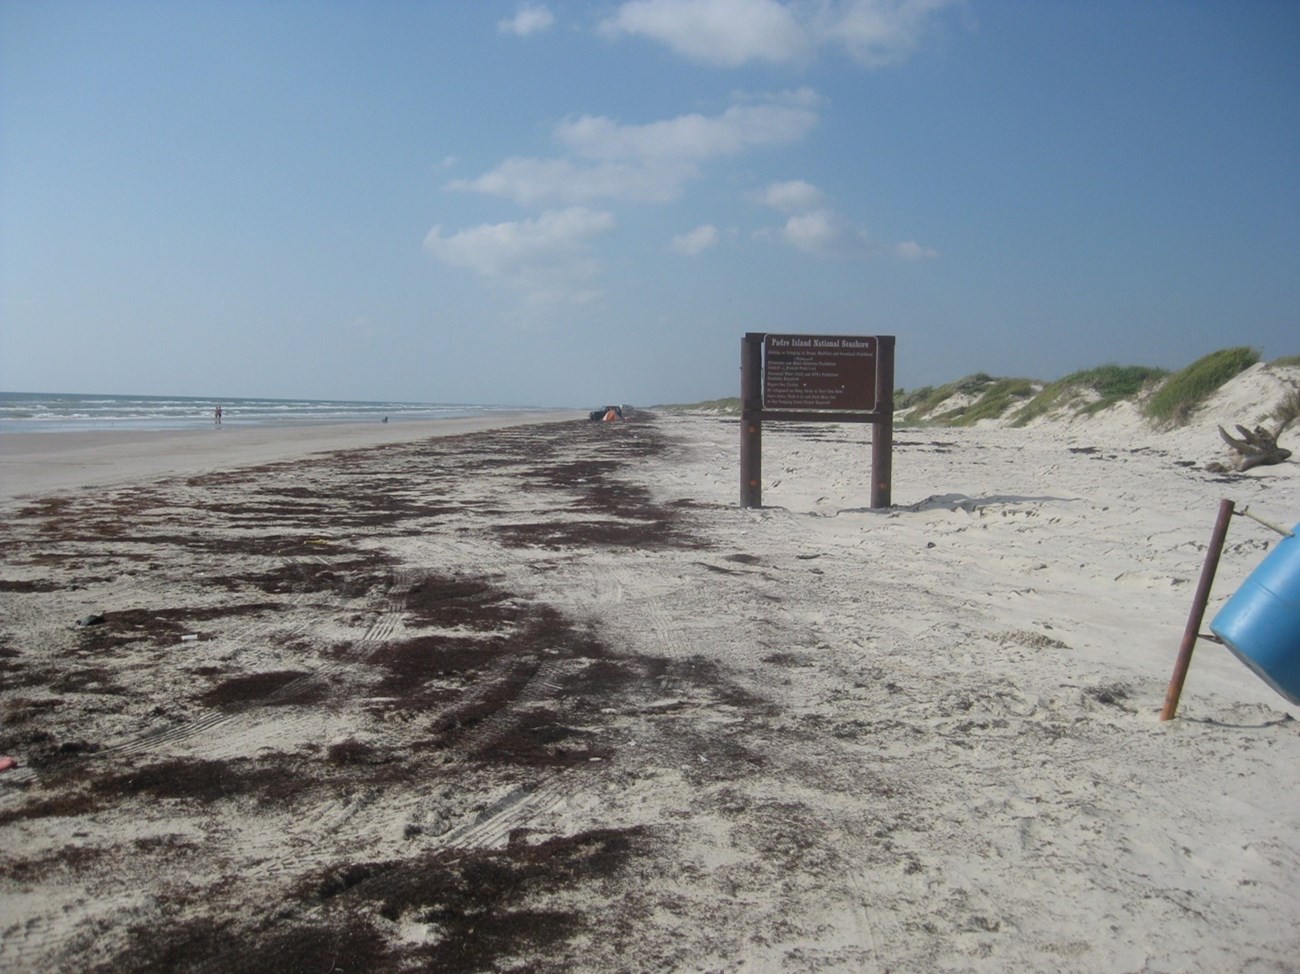 A sandy beach with a brown sign in the center.